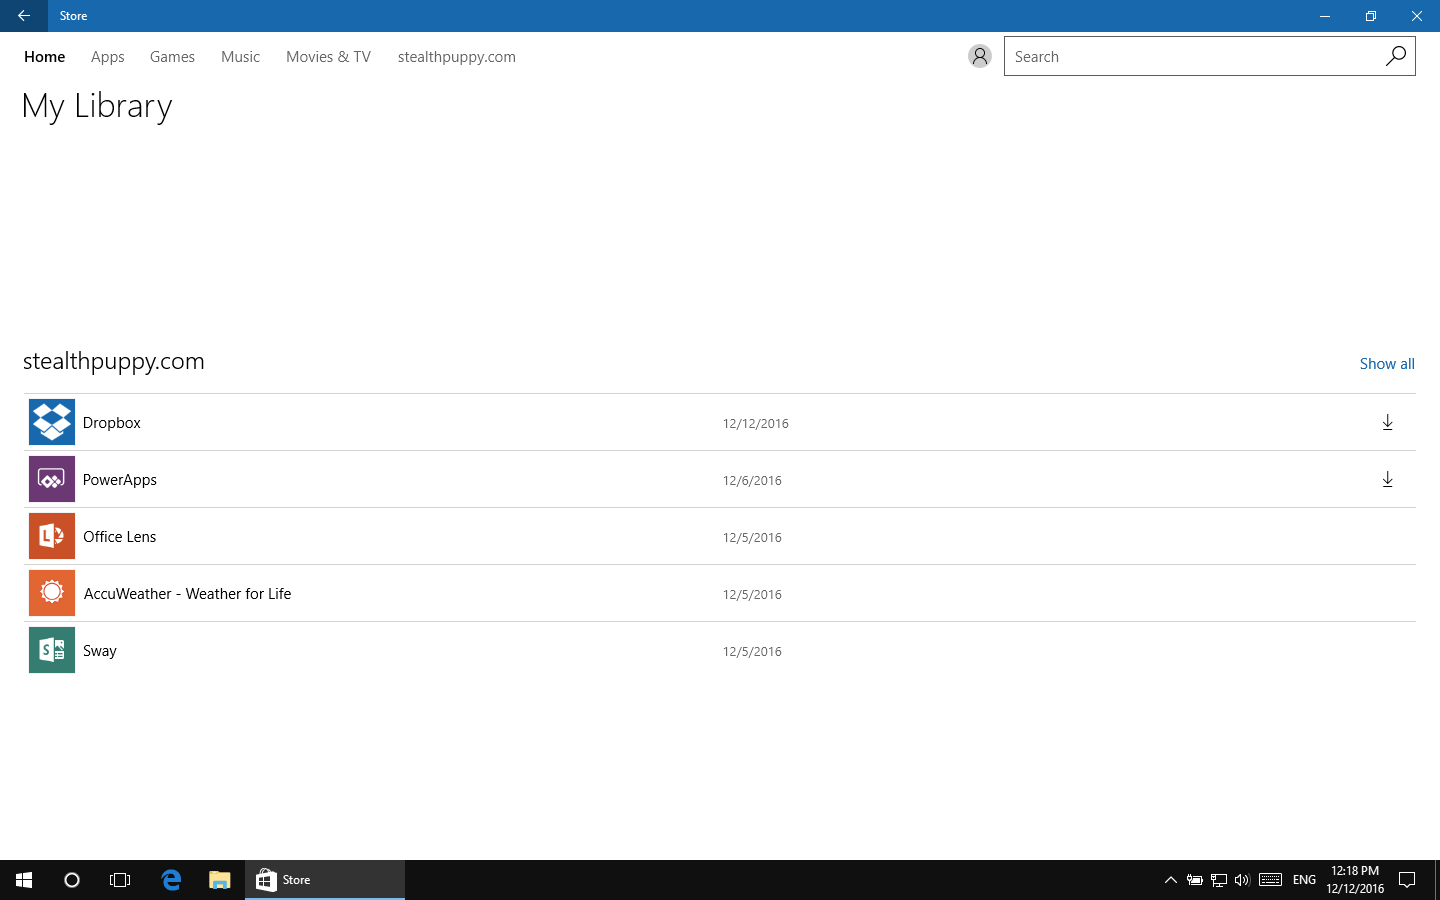 My Library in the Windows 10 Store app